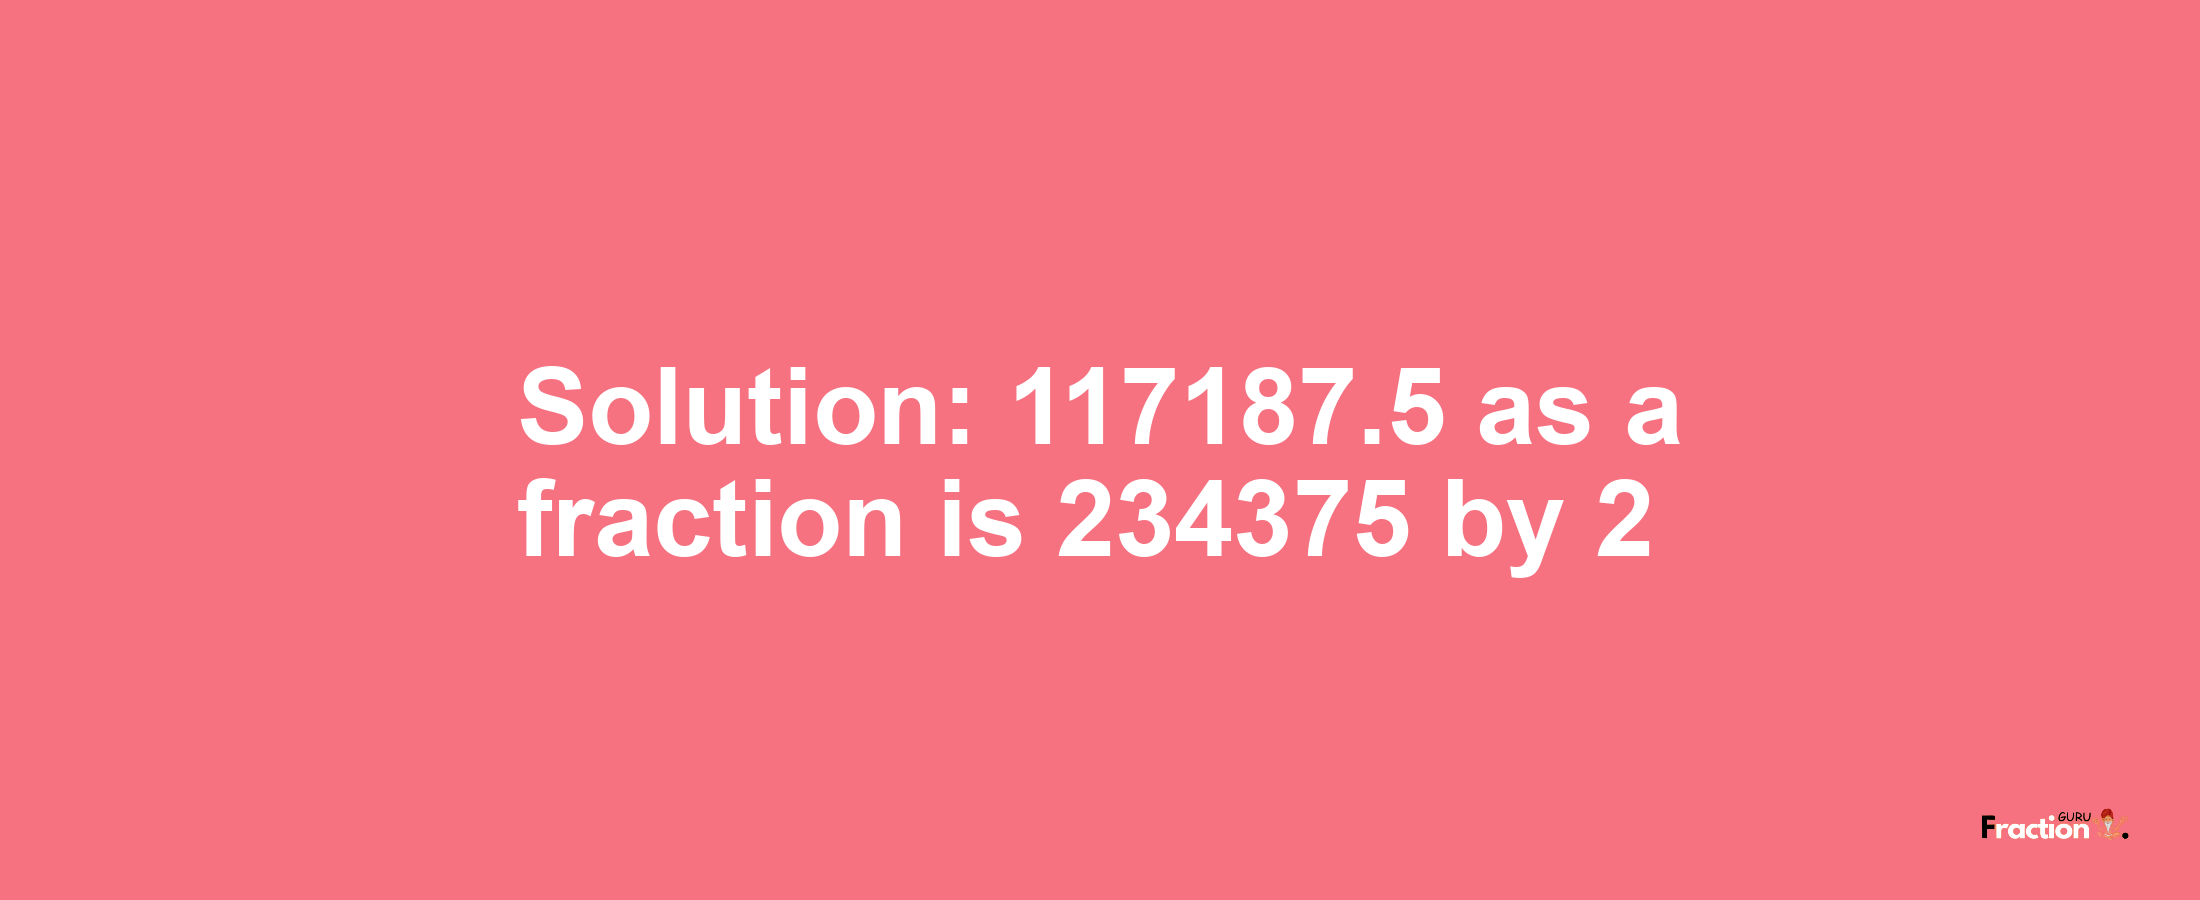 Solution:117187.5 as a fraction is 234375/2